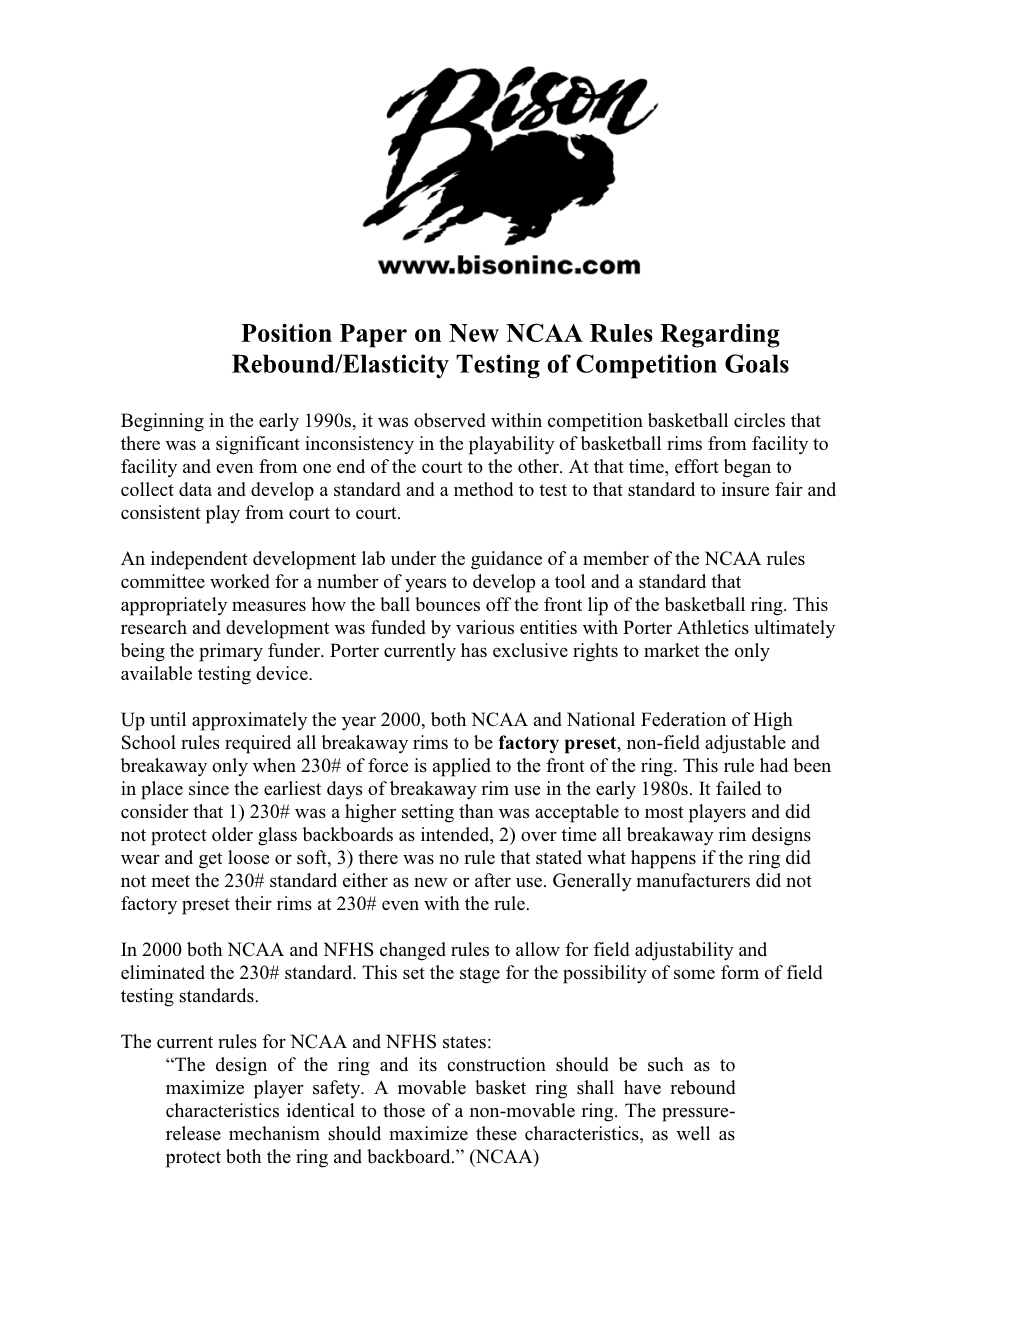 Position Paper on New NCAA Rules Regarding Rebound/Elasticity Testing of Competition Goals